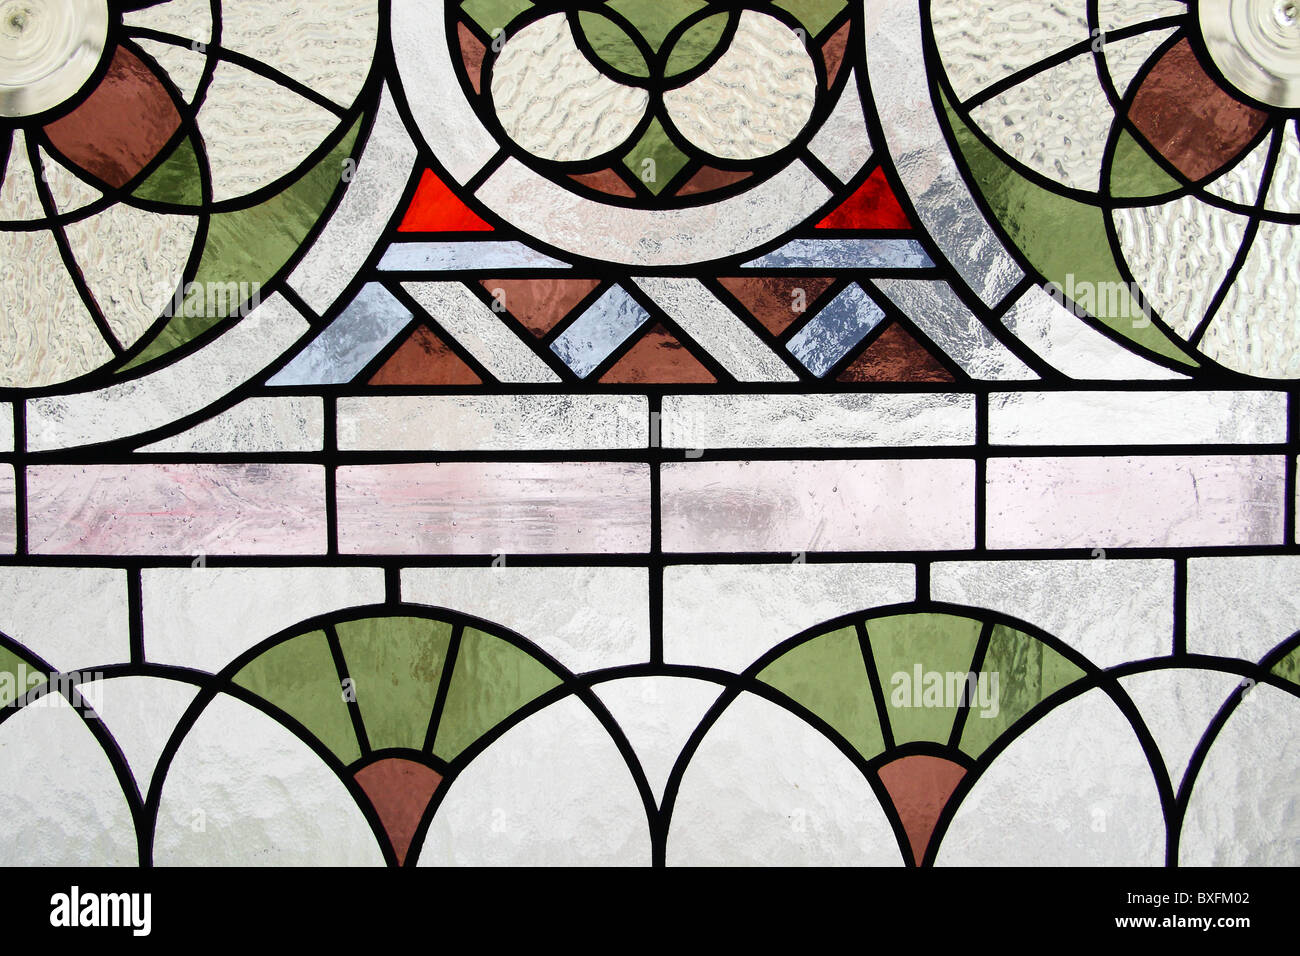 The White Stork Synagogue. Details of stained glass window. Wroclaw, Lower Silesia, Poland. Stock Photo